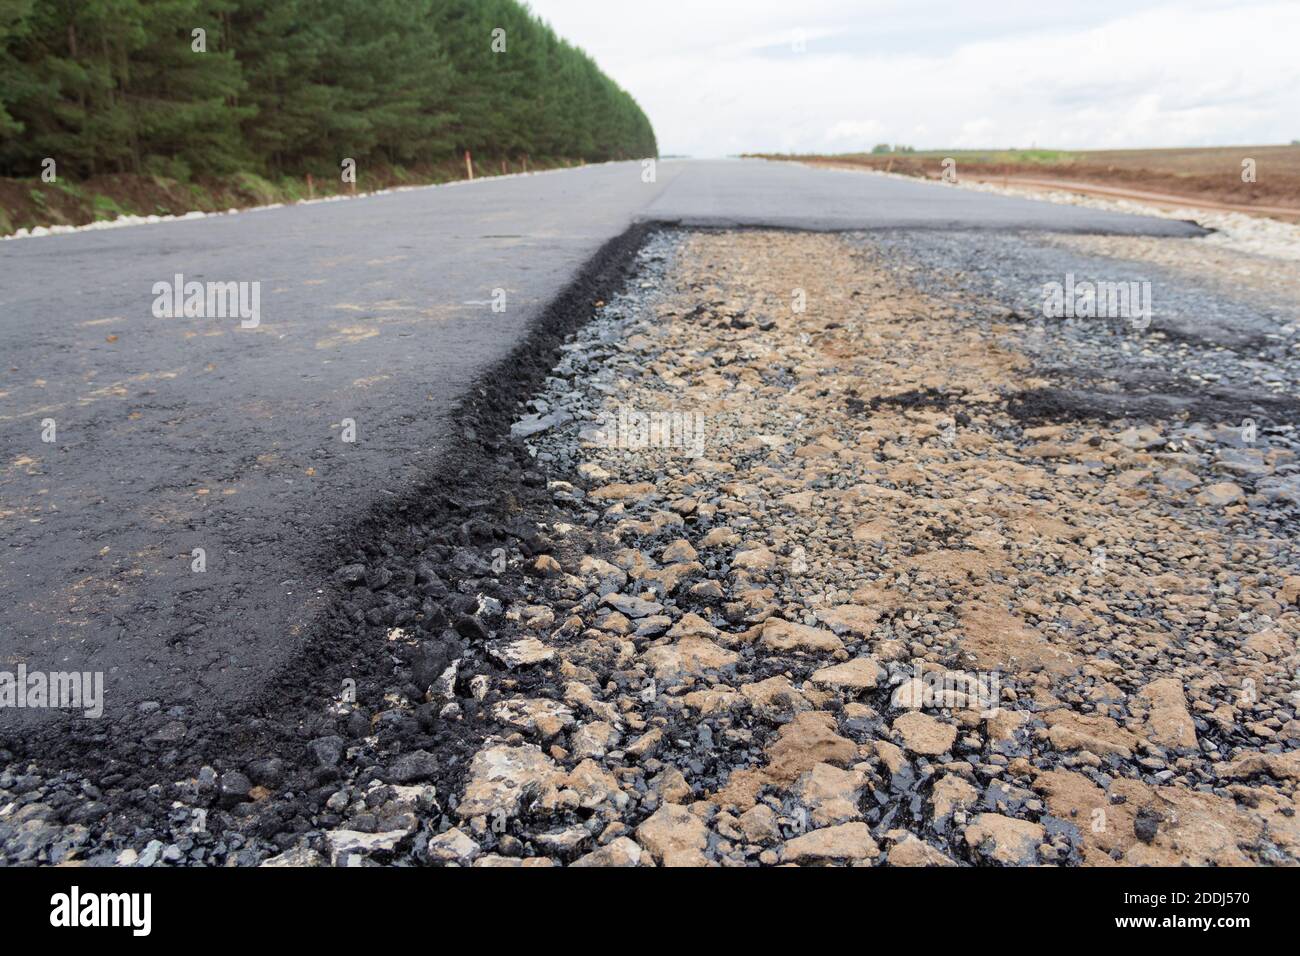 Stones on the edge of the asphalt road The border of the asphalt road and the shoulder. Stock Photo